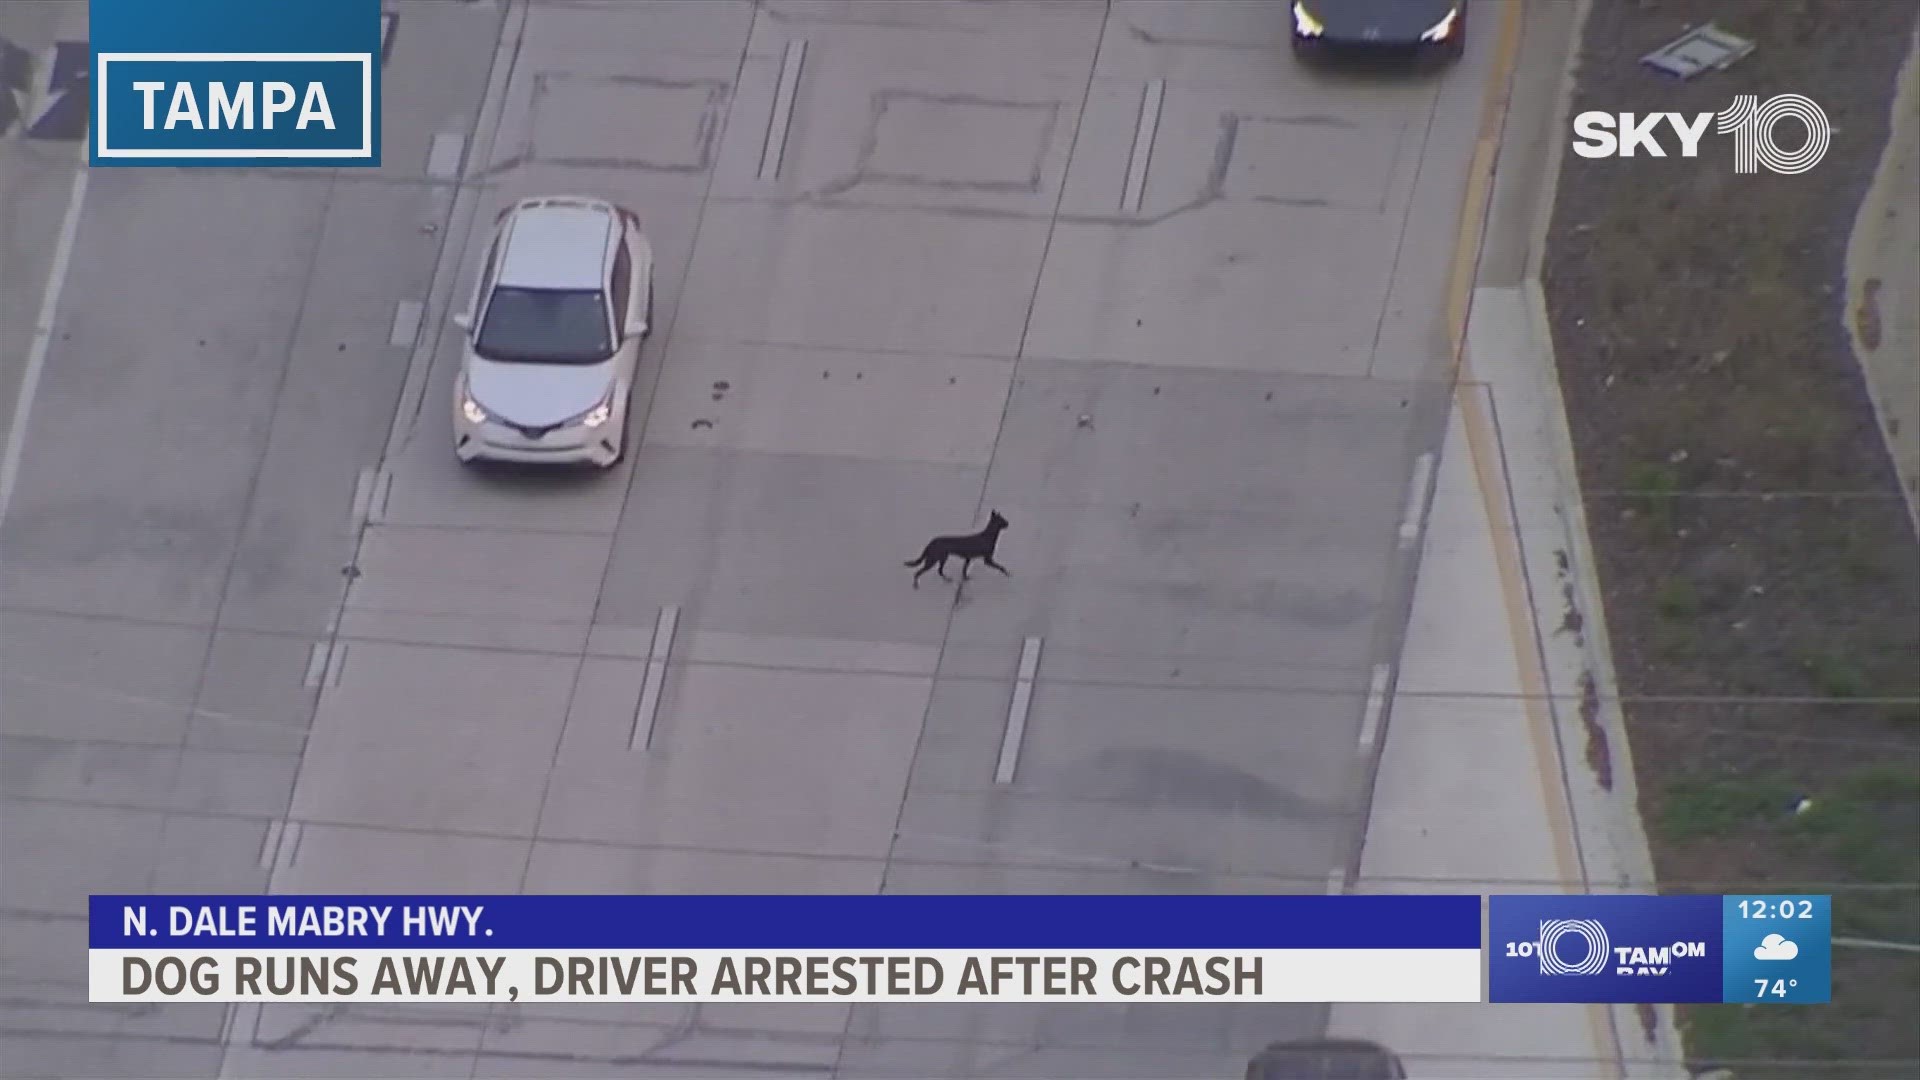 Sky 10 video captured a dog running through nearby plaza parking lots and into oncoming traffic.